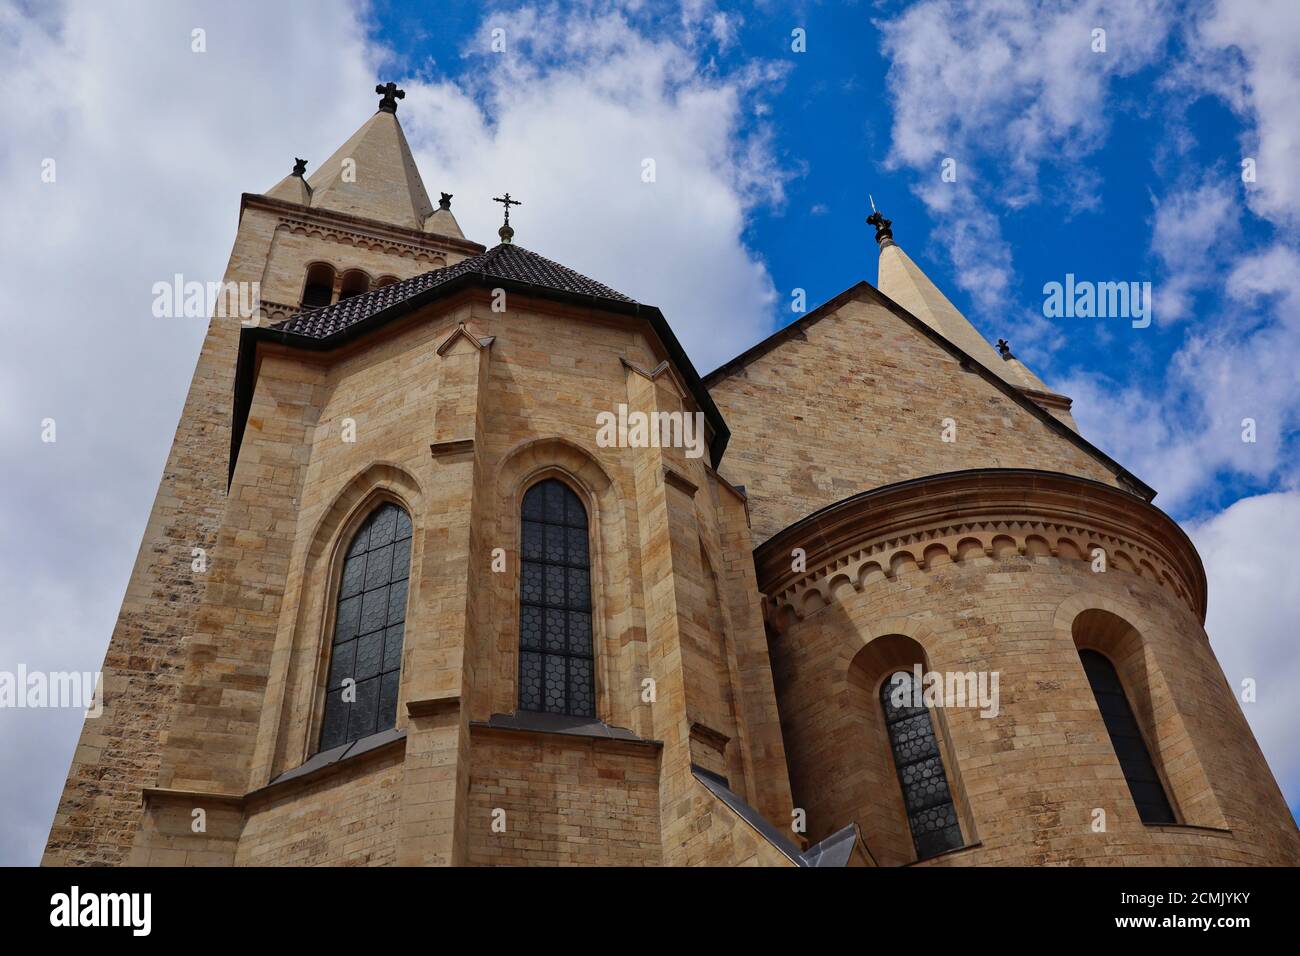 St. George's Basilica s the oldest surviving Church Building within Prague Castle Complex. Exterior of Beautiful Historical Building. Stock Photo